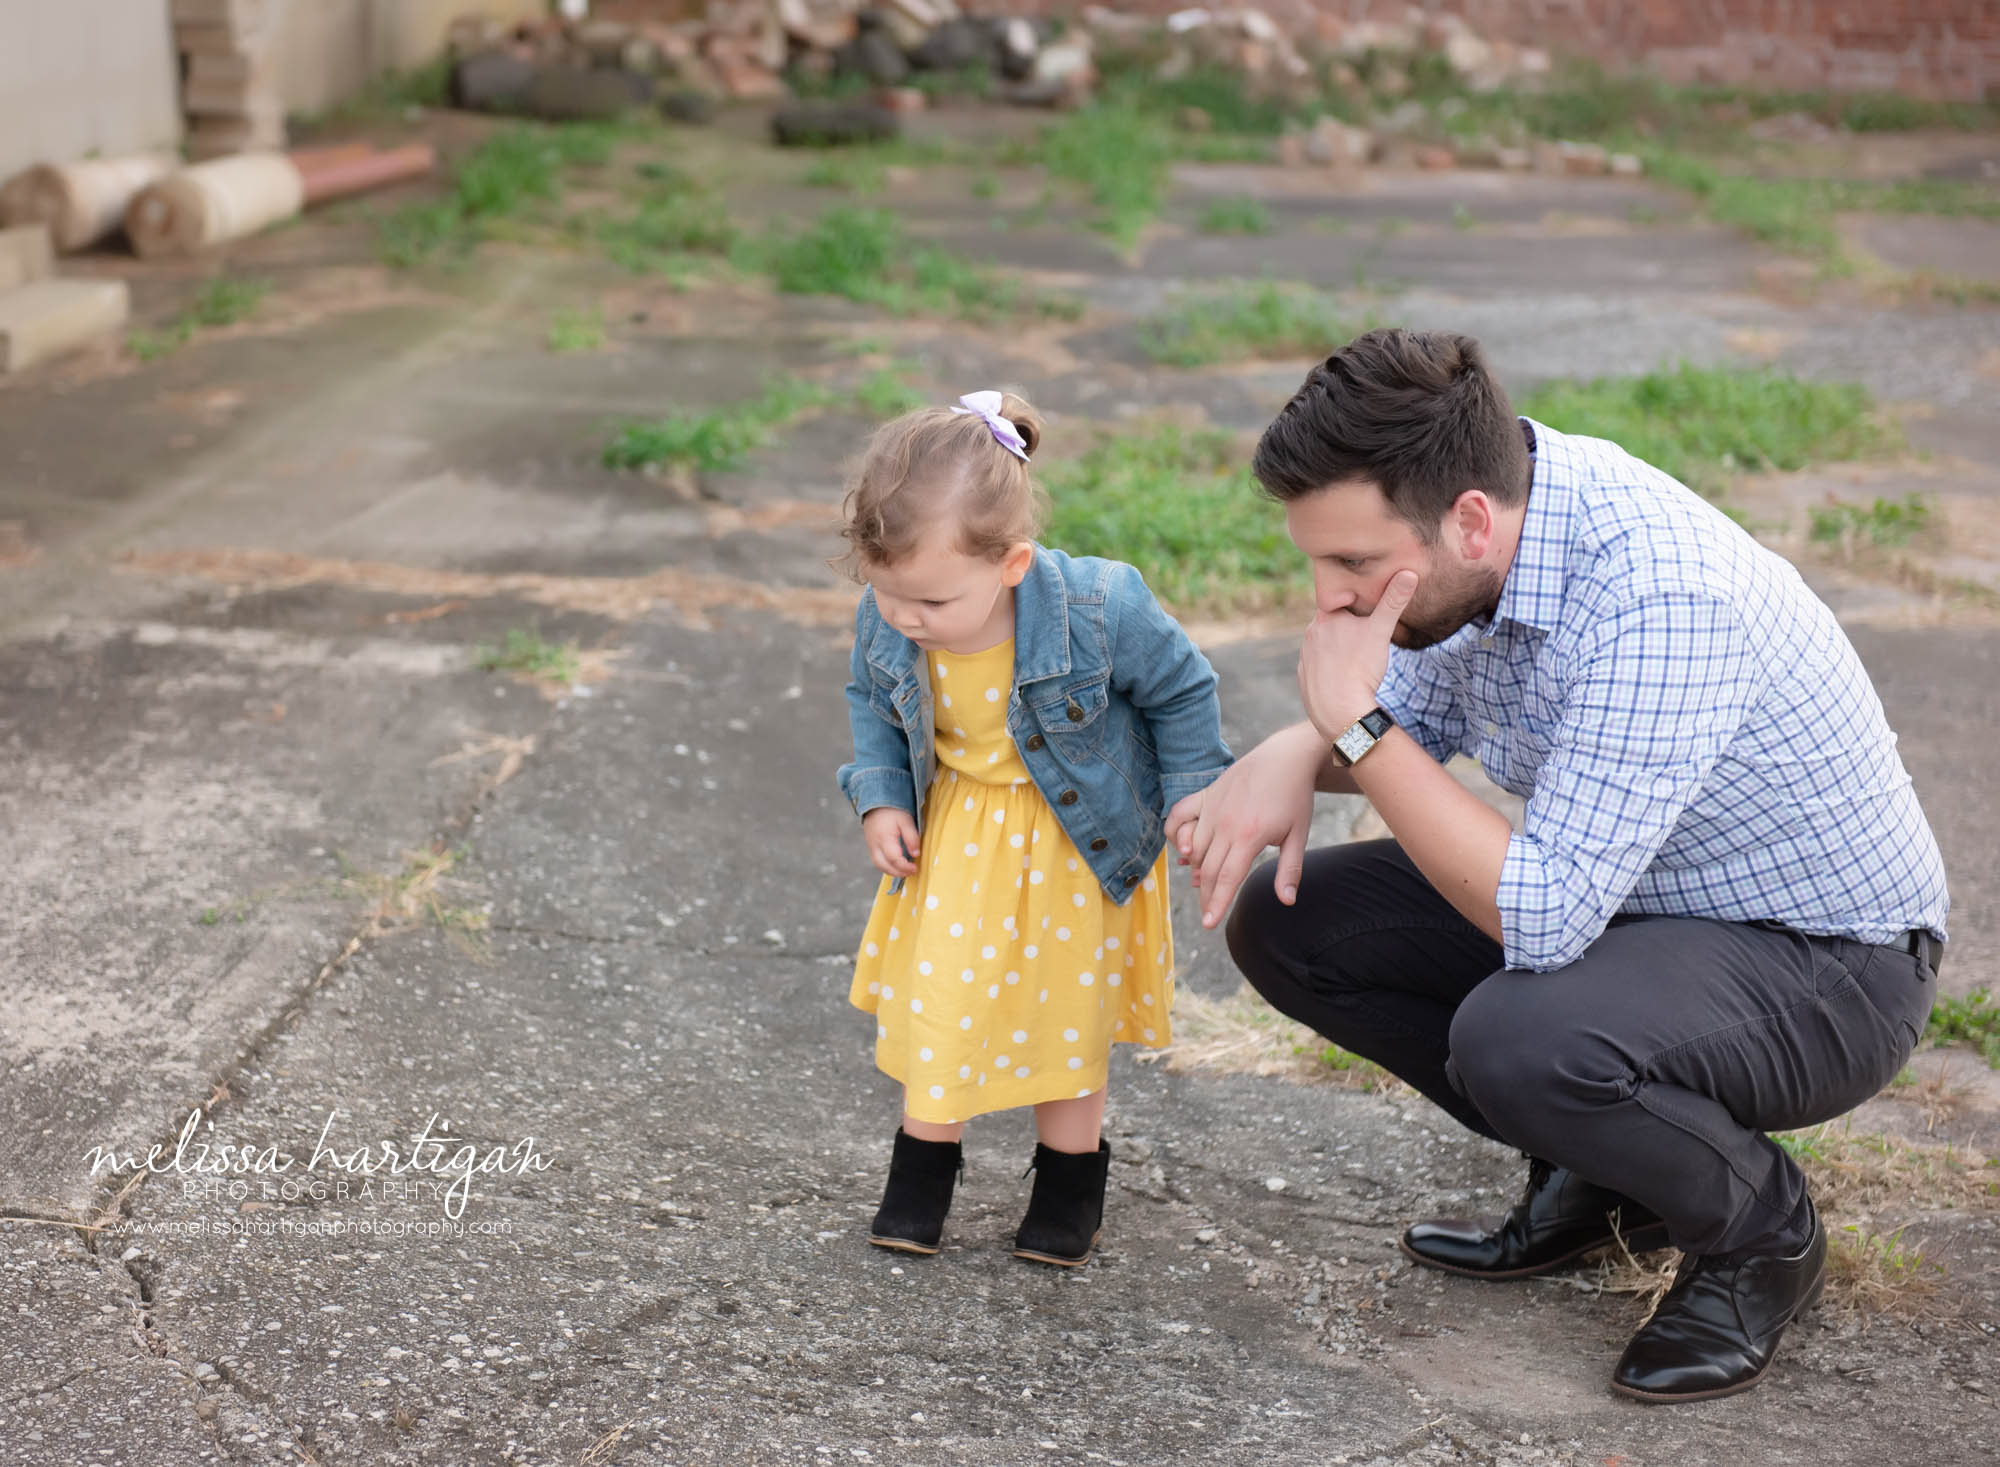 daughter and dad looking at something on the ground